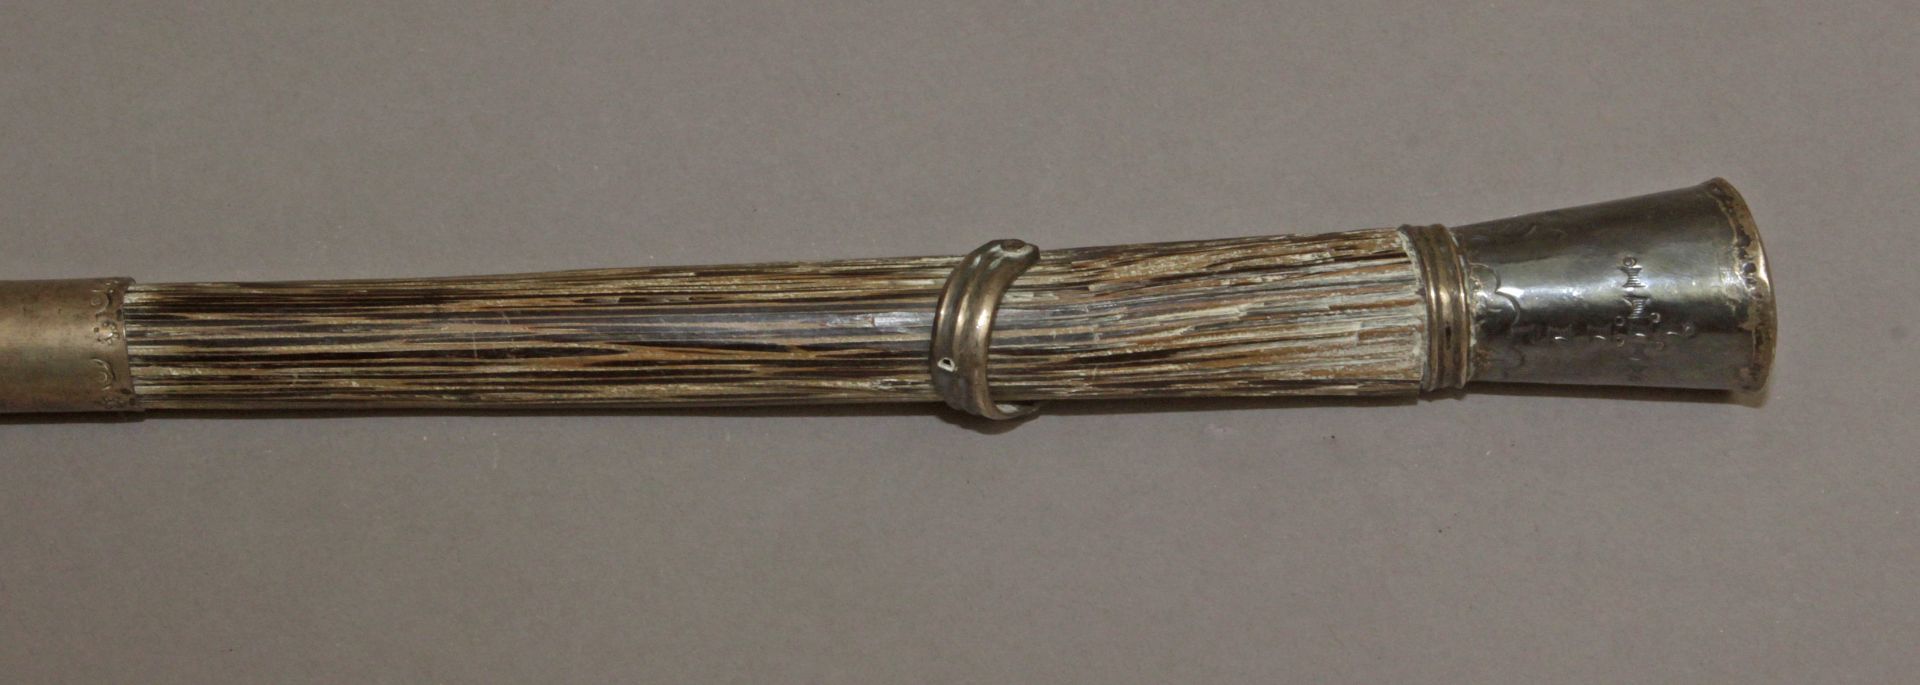 A 19th century walking stick - Image 5 of 5